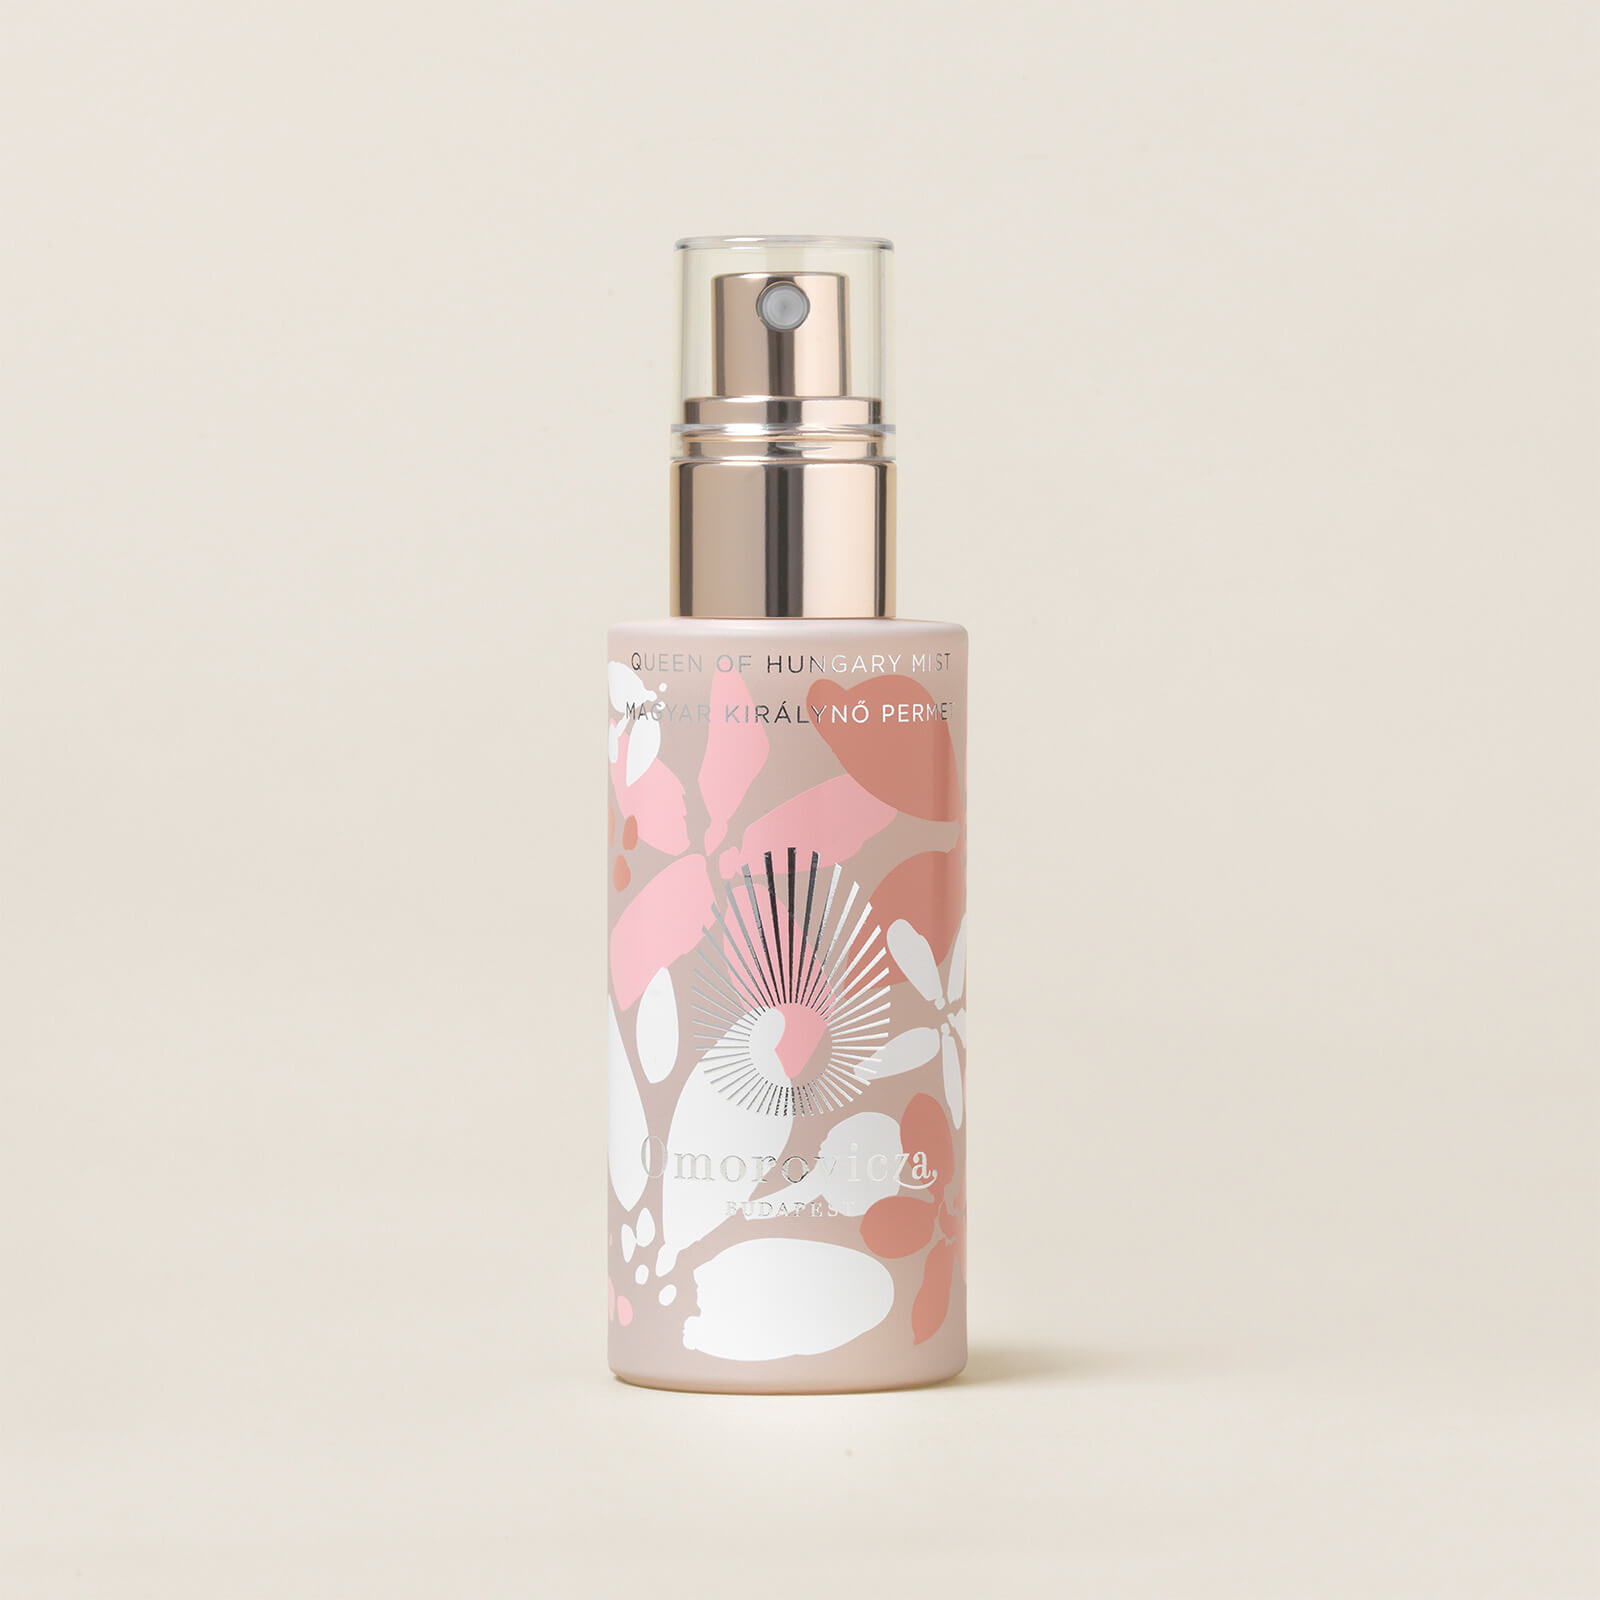 Omorovicza Queen of Hungary Mist 50ml 2020 Limited Edition - Pink Flowers 50ml